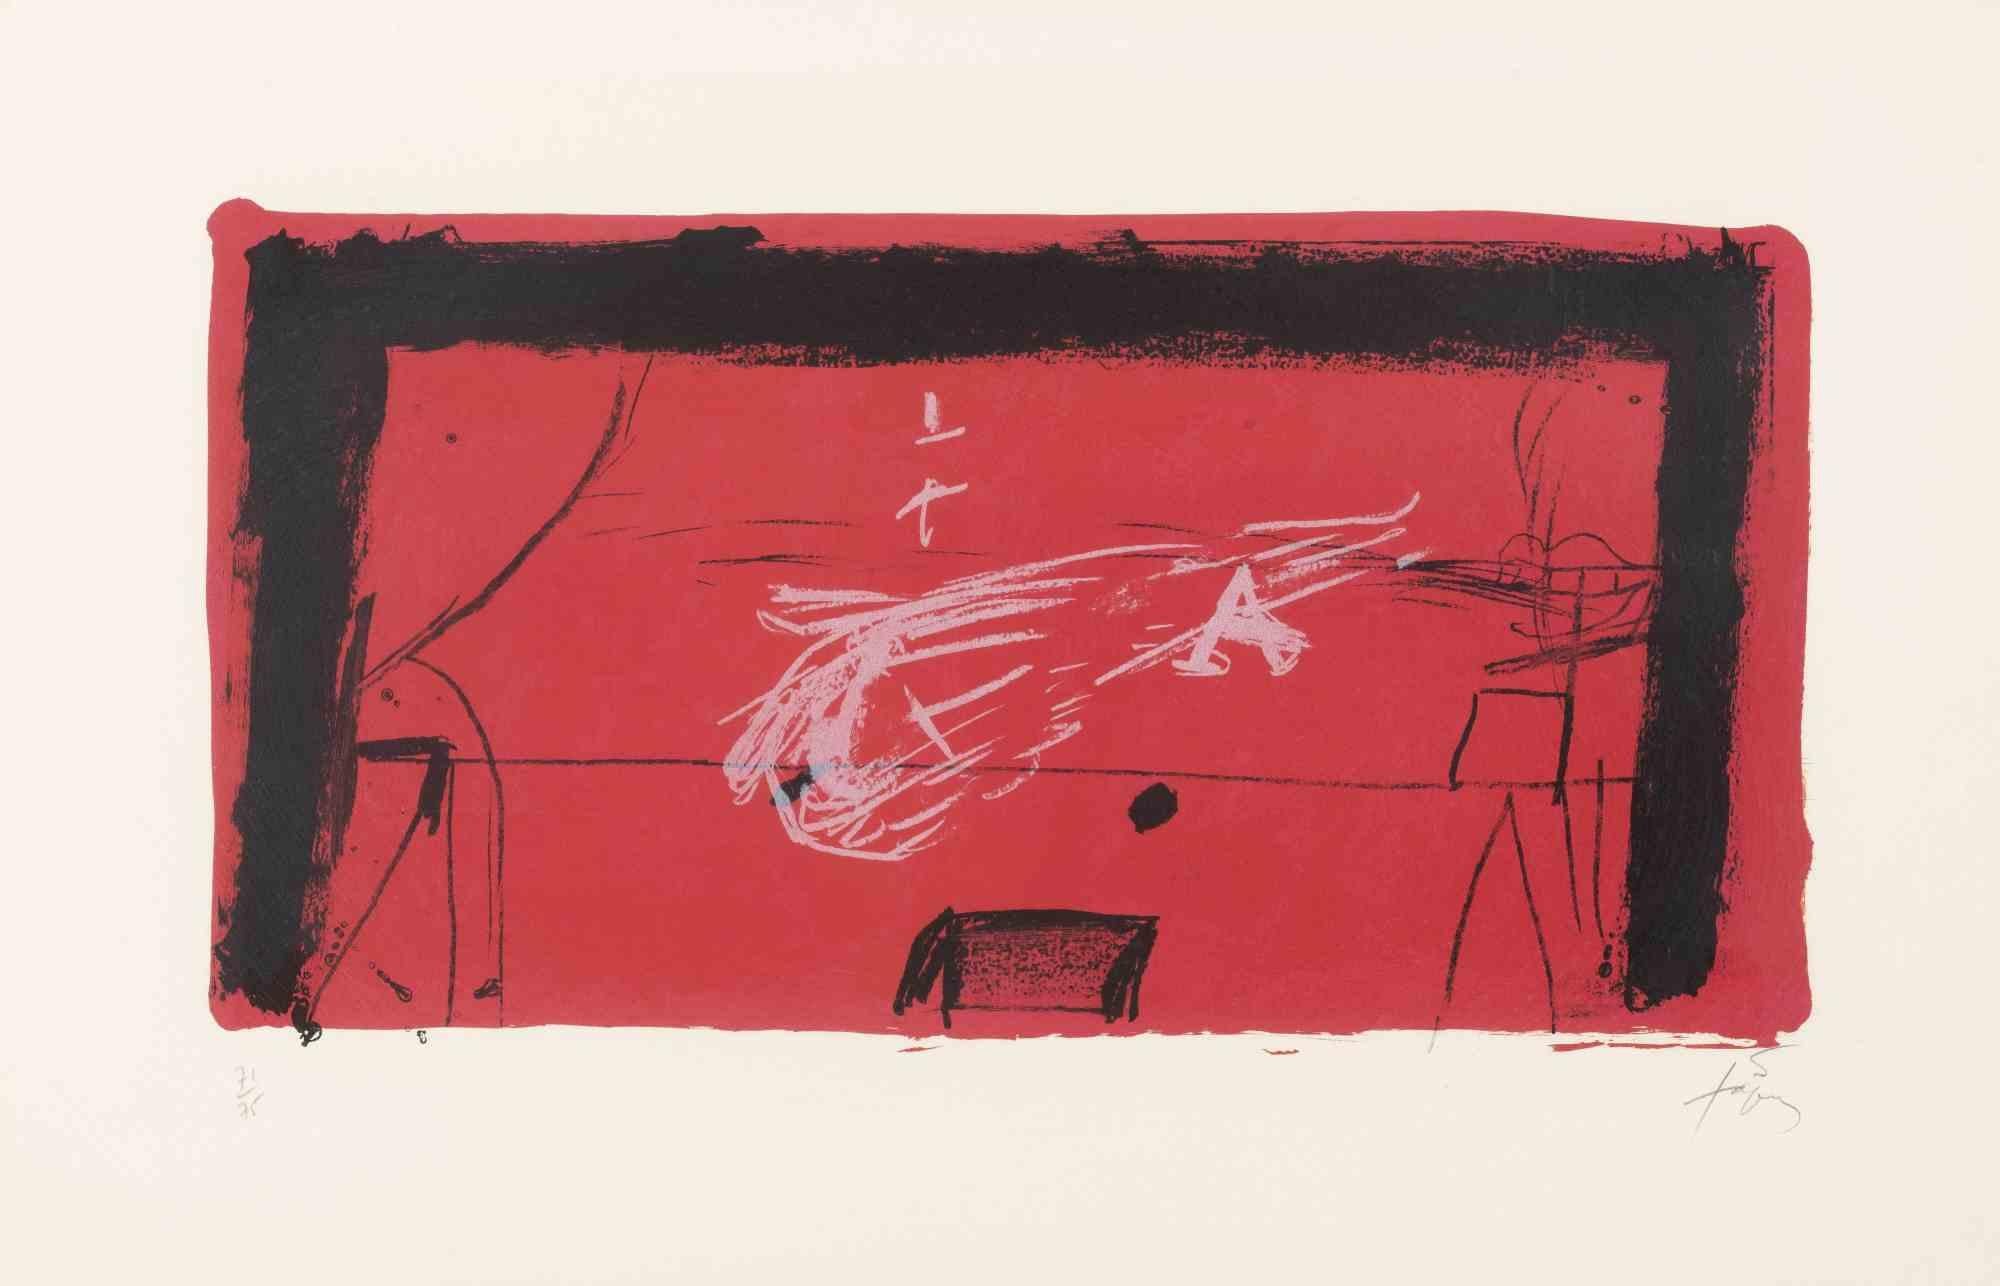 Antoni Tàpies Abstract Print - The Theater Stage - Lithograph by Antoni Tapies - 1976